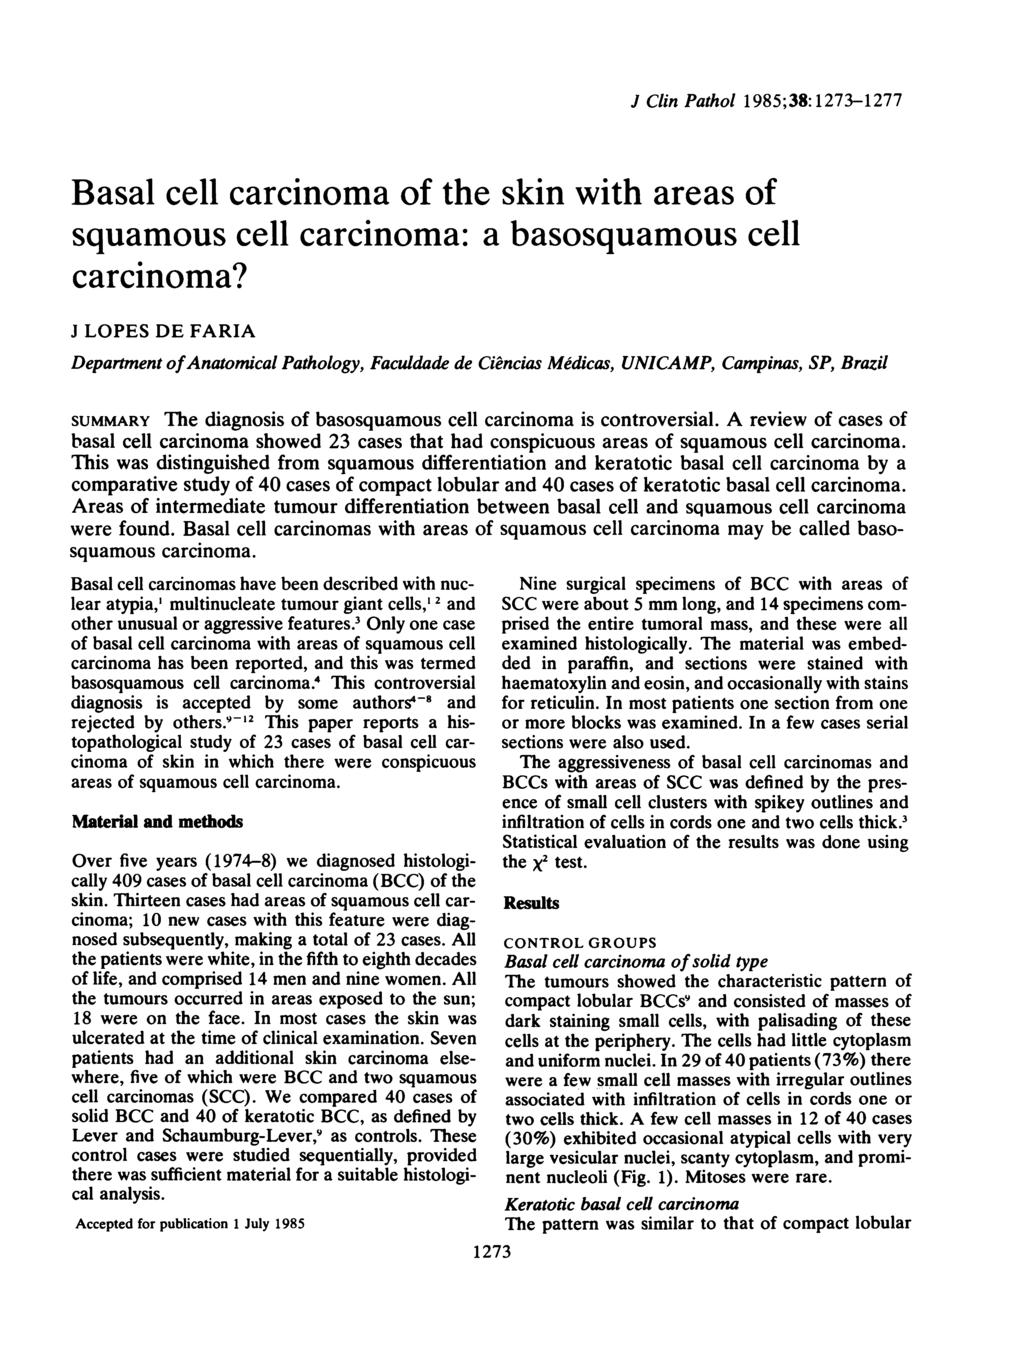 J Clin Pathol 1985;38:1273-1277 Basal cell carcinoma of the skin with areas of squamous cell carcinoma: a basosquamous cell carcinoma?